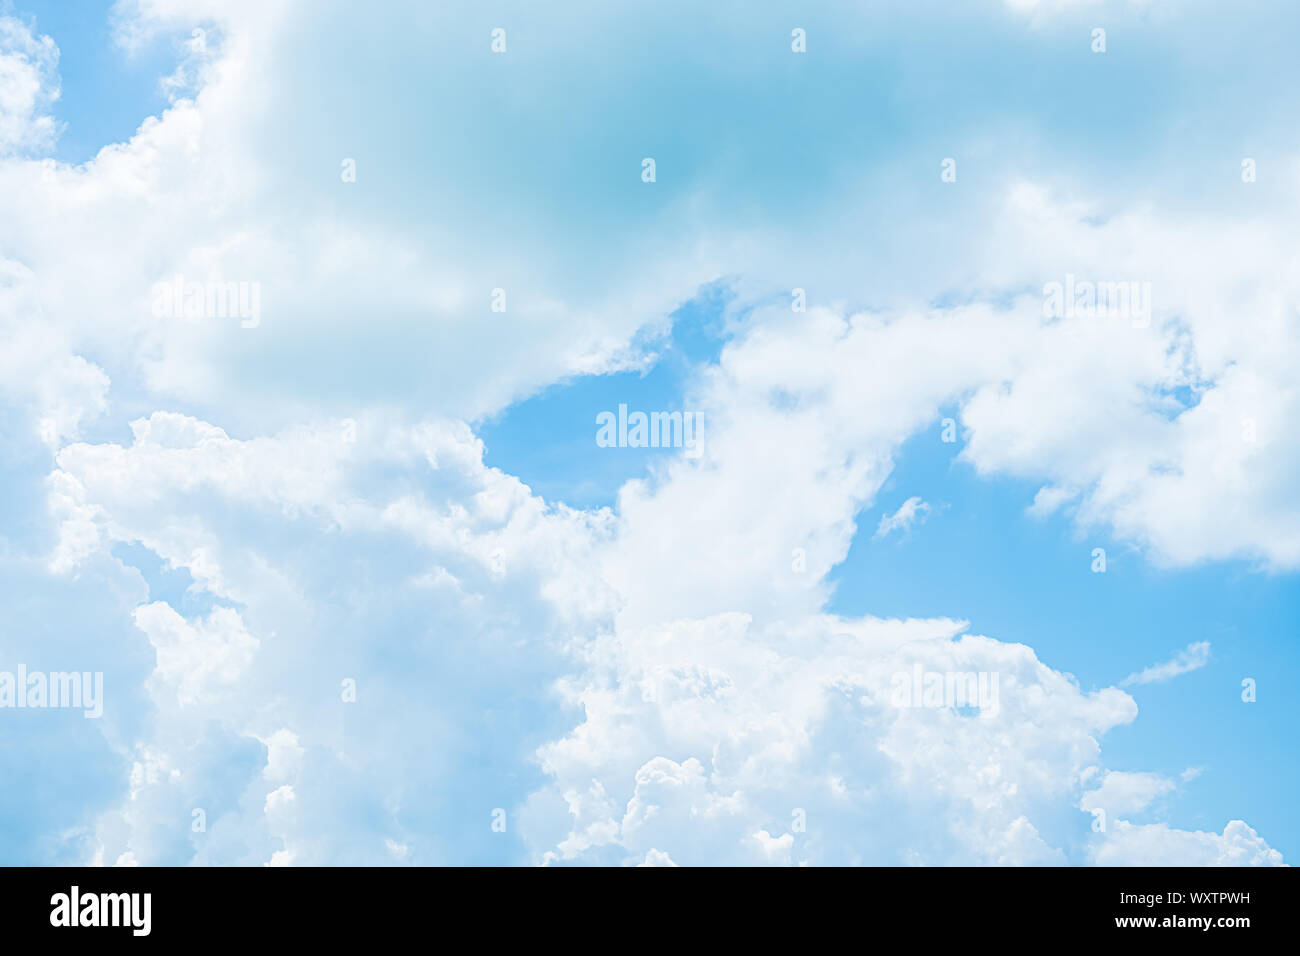 White clouds in blue sky, abstract blurred background. Stock Photo